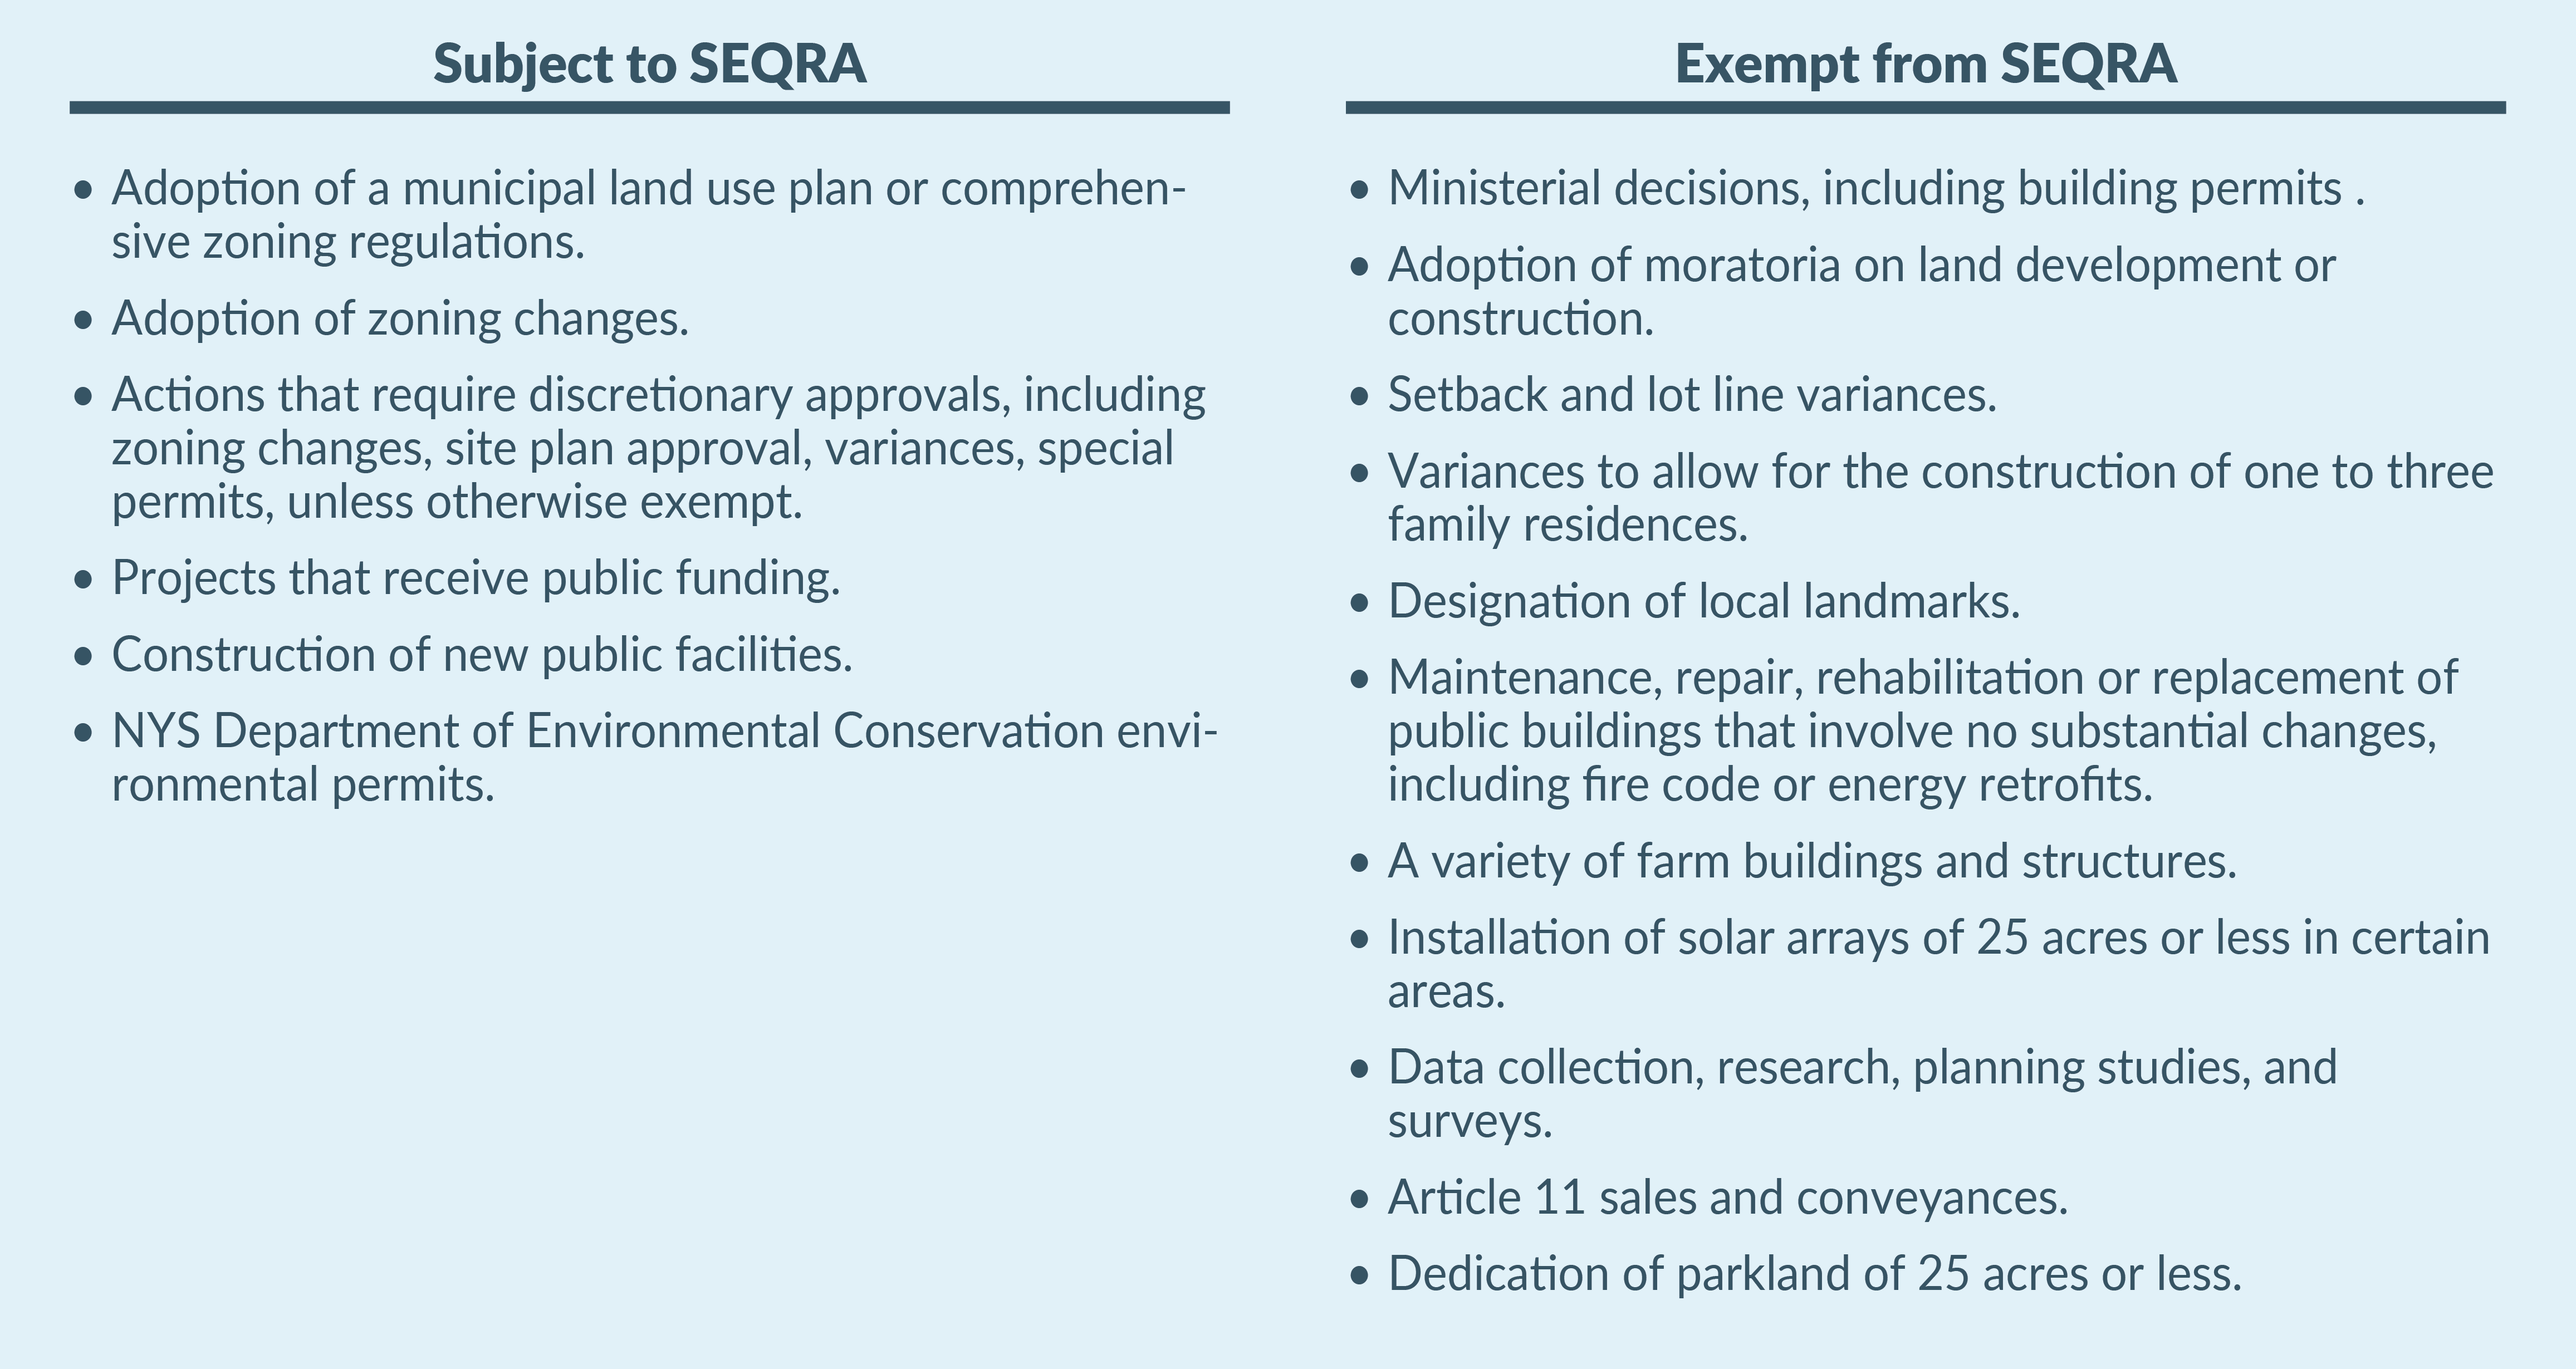 Subject to SEQRA/Exempt from SEQRA